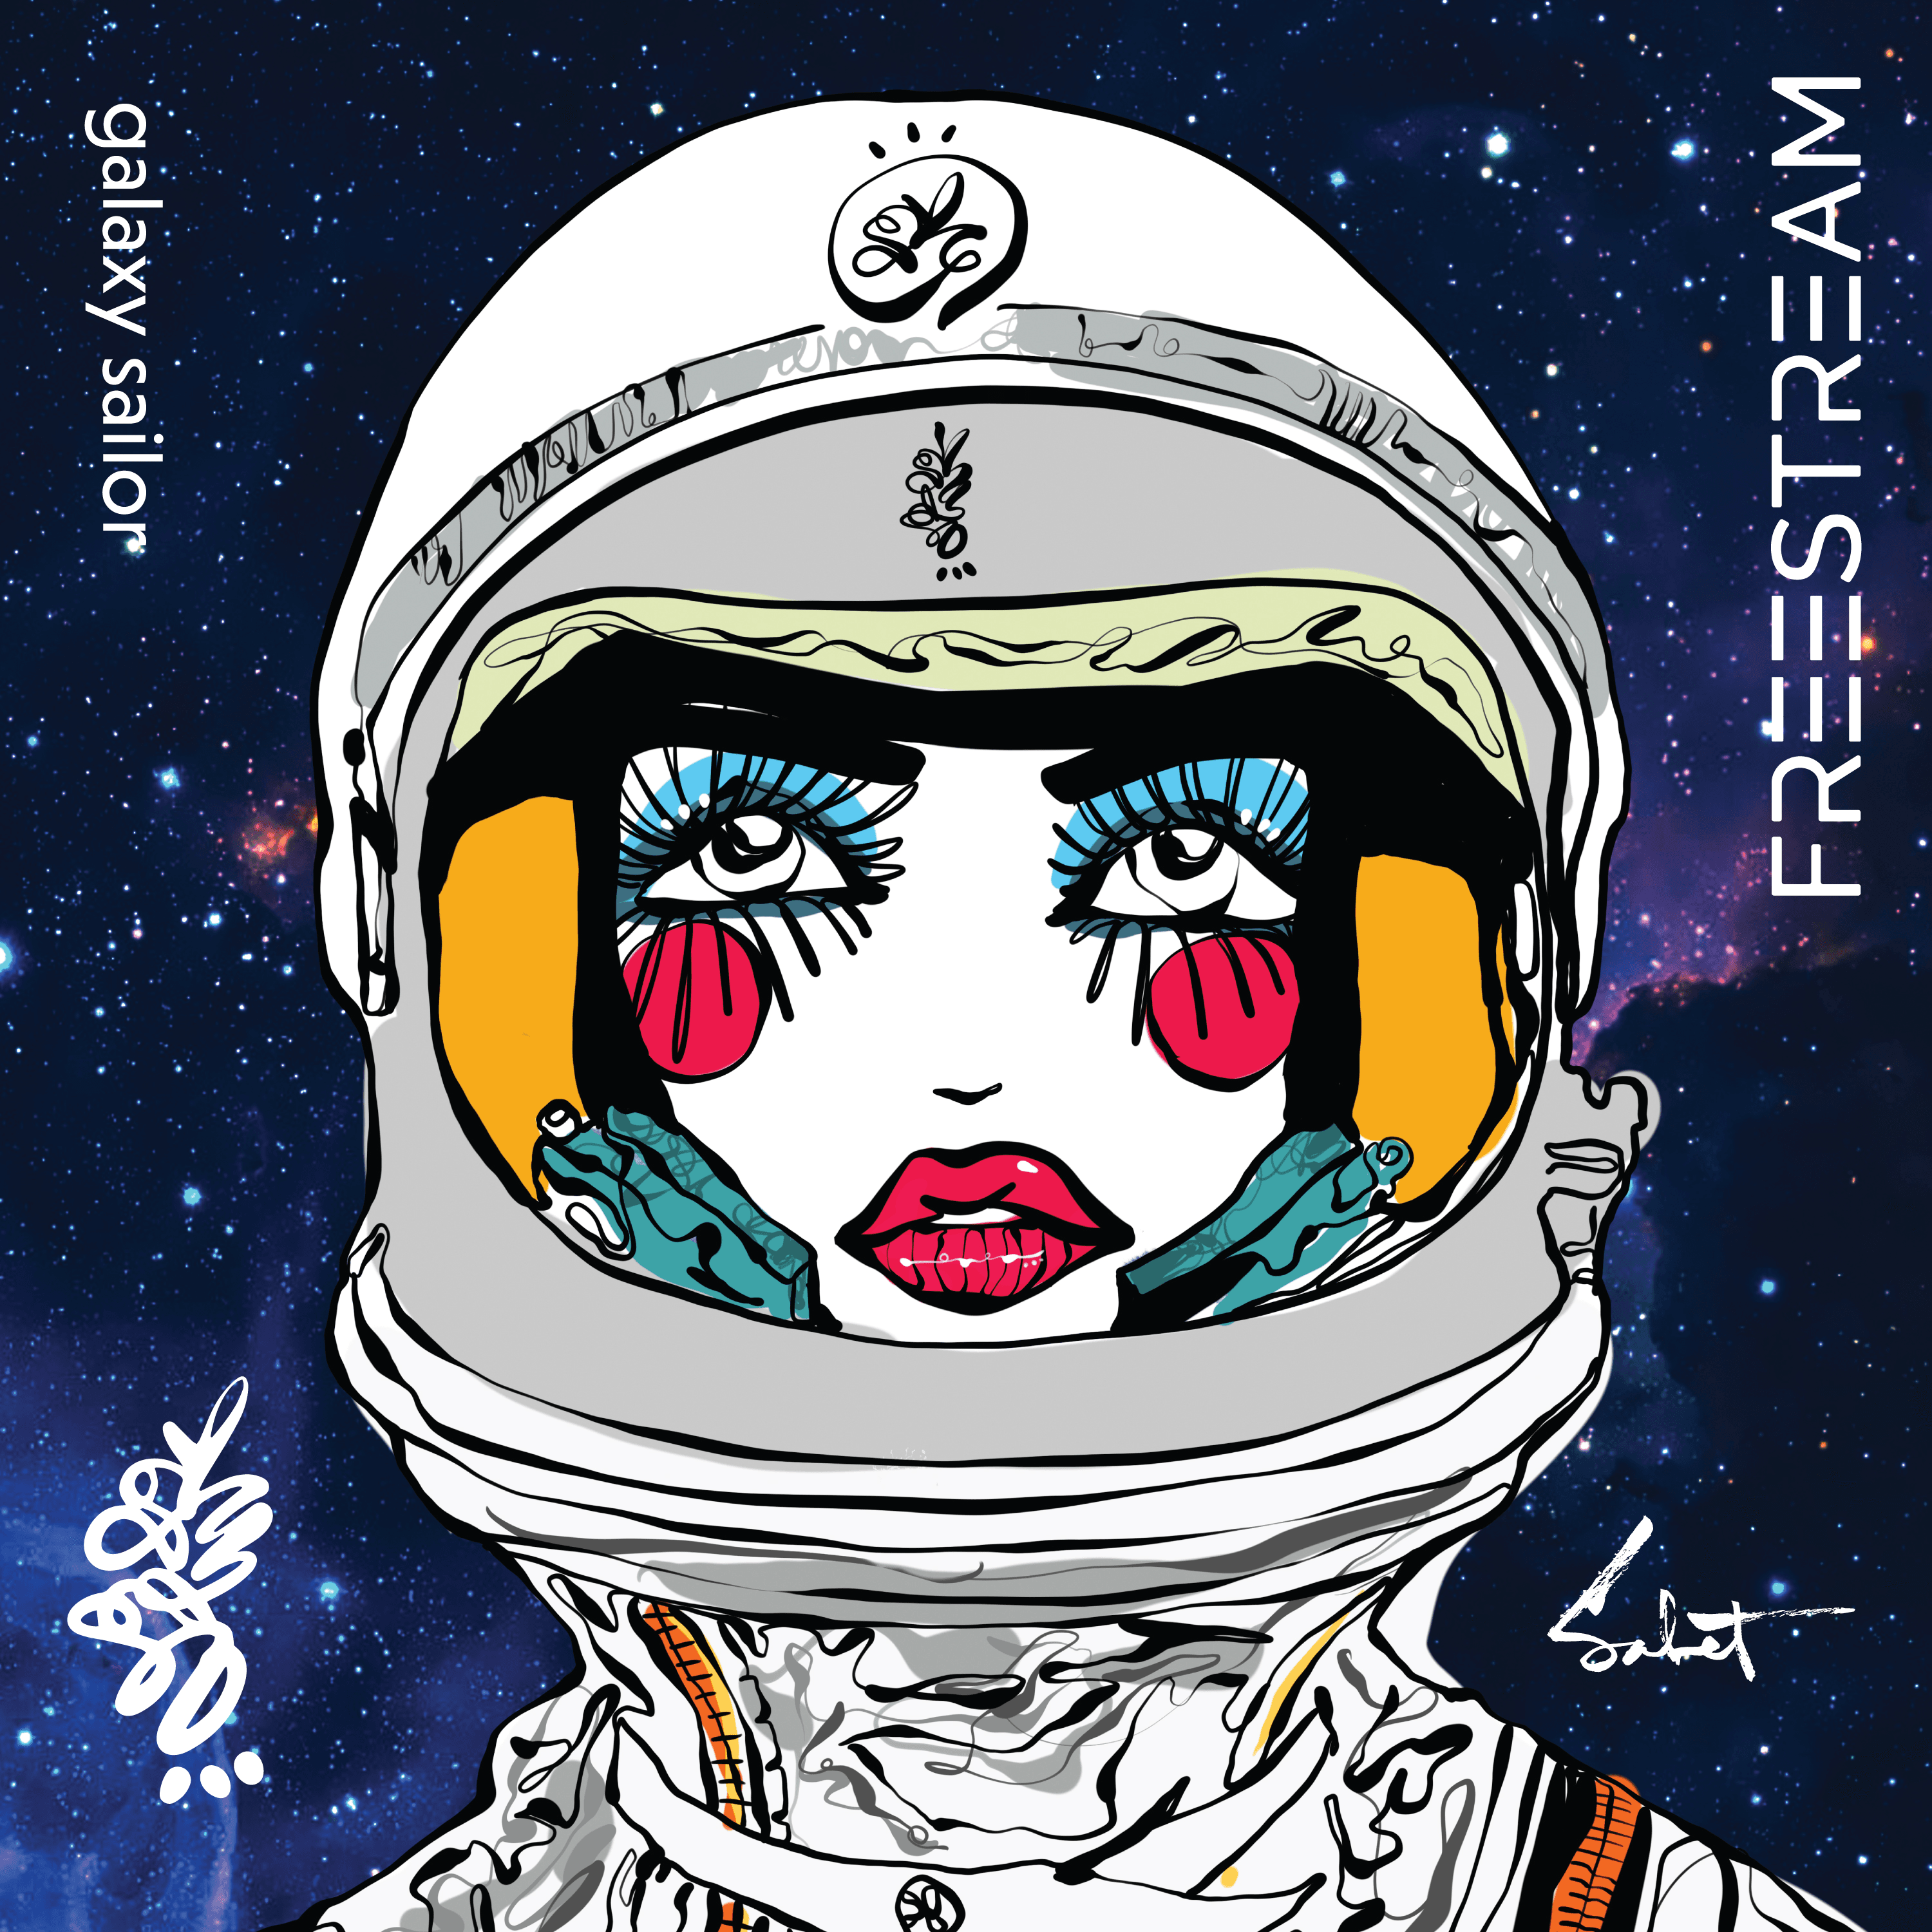 Galaxy Sailor Lo-Fi / Chill Beats Album by Sabet x Freestream Records. UNLOCKABLE Includes 30 Royalty Free / DCMA Safe tracks for your #NFT creations, videos and streaming